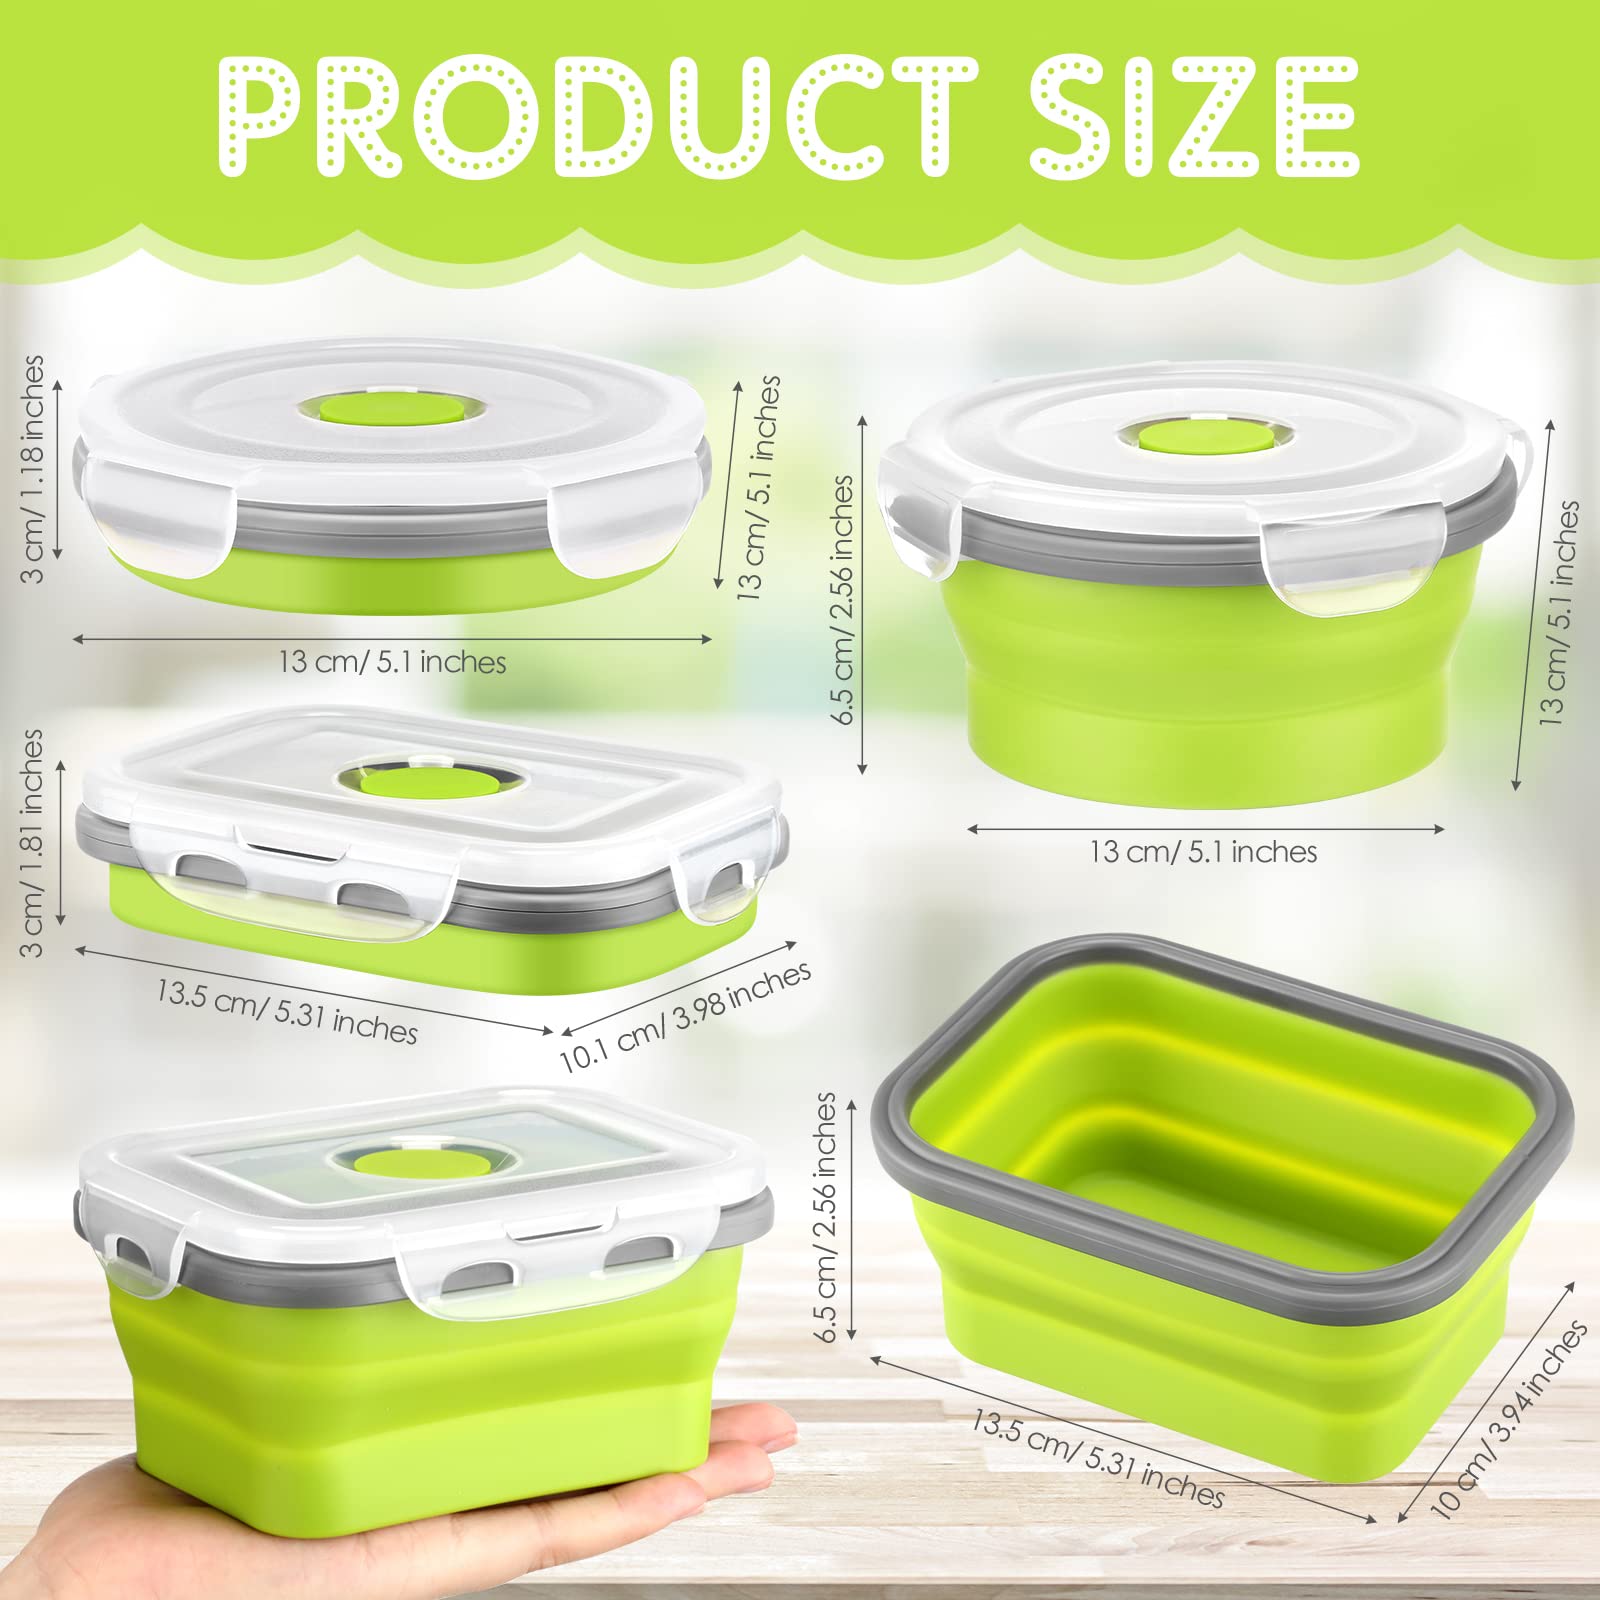 8 Pcs Small Silicone Collapsible Food Storage Containers with Airtight Lids Stacking Silicone Meal Prep Lunch Containers for Kitchen, Traveling, Leftover, Microwave Freezer Dishwasher Safe, 4 Colors